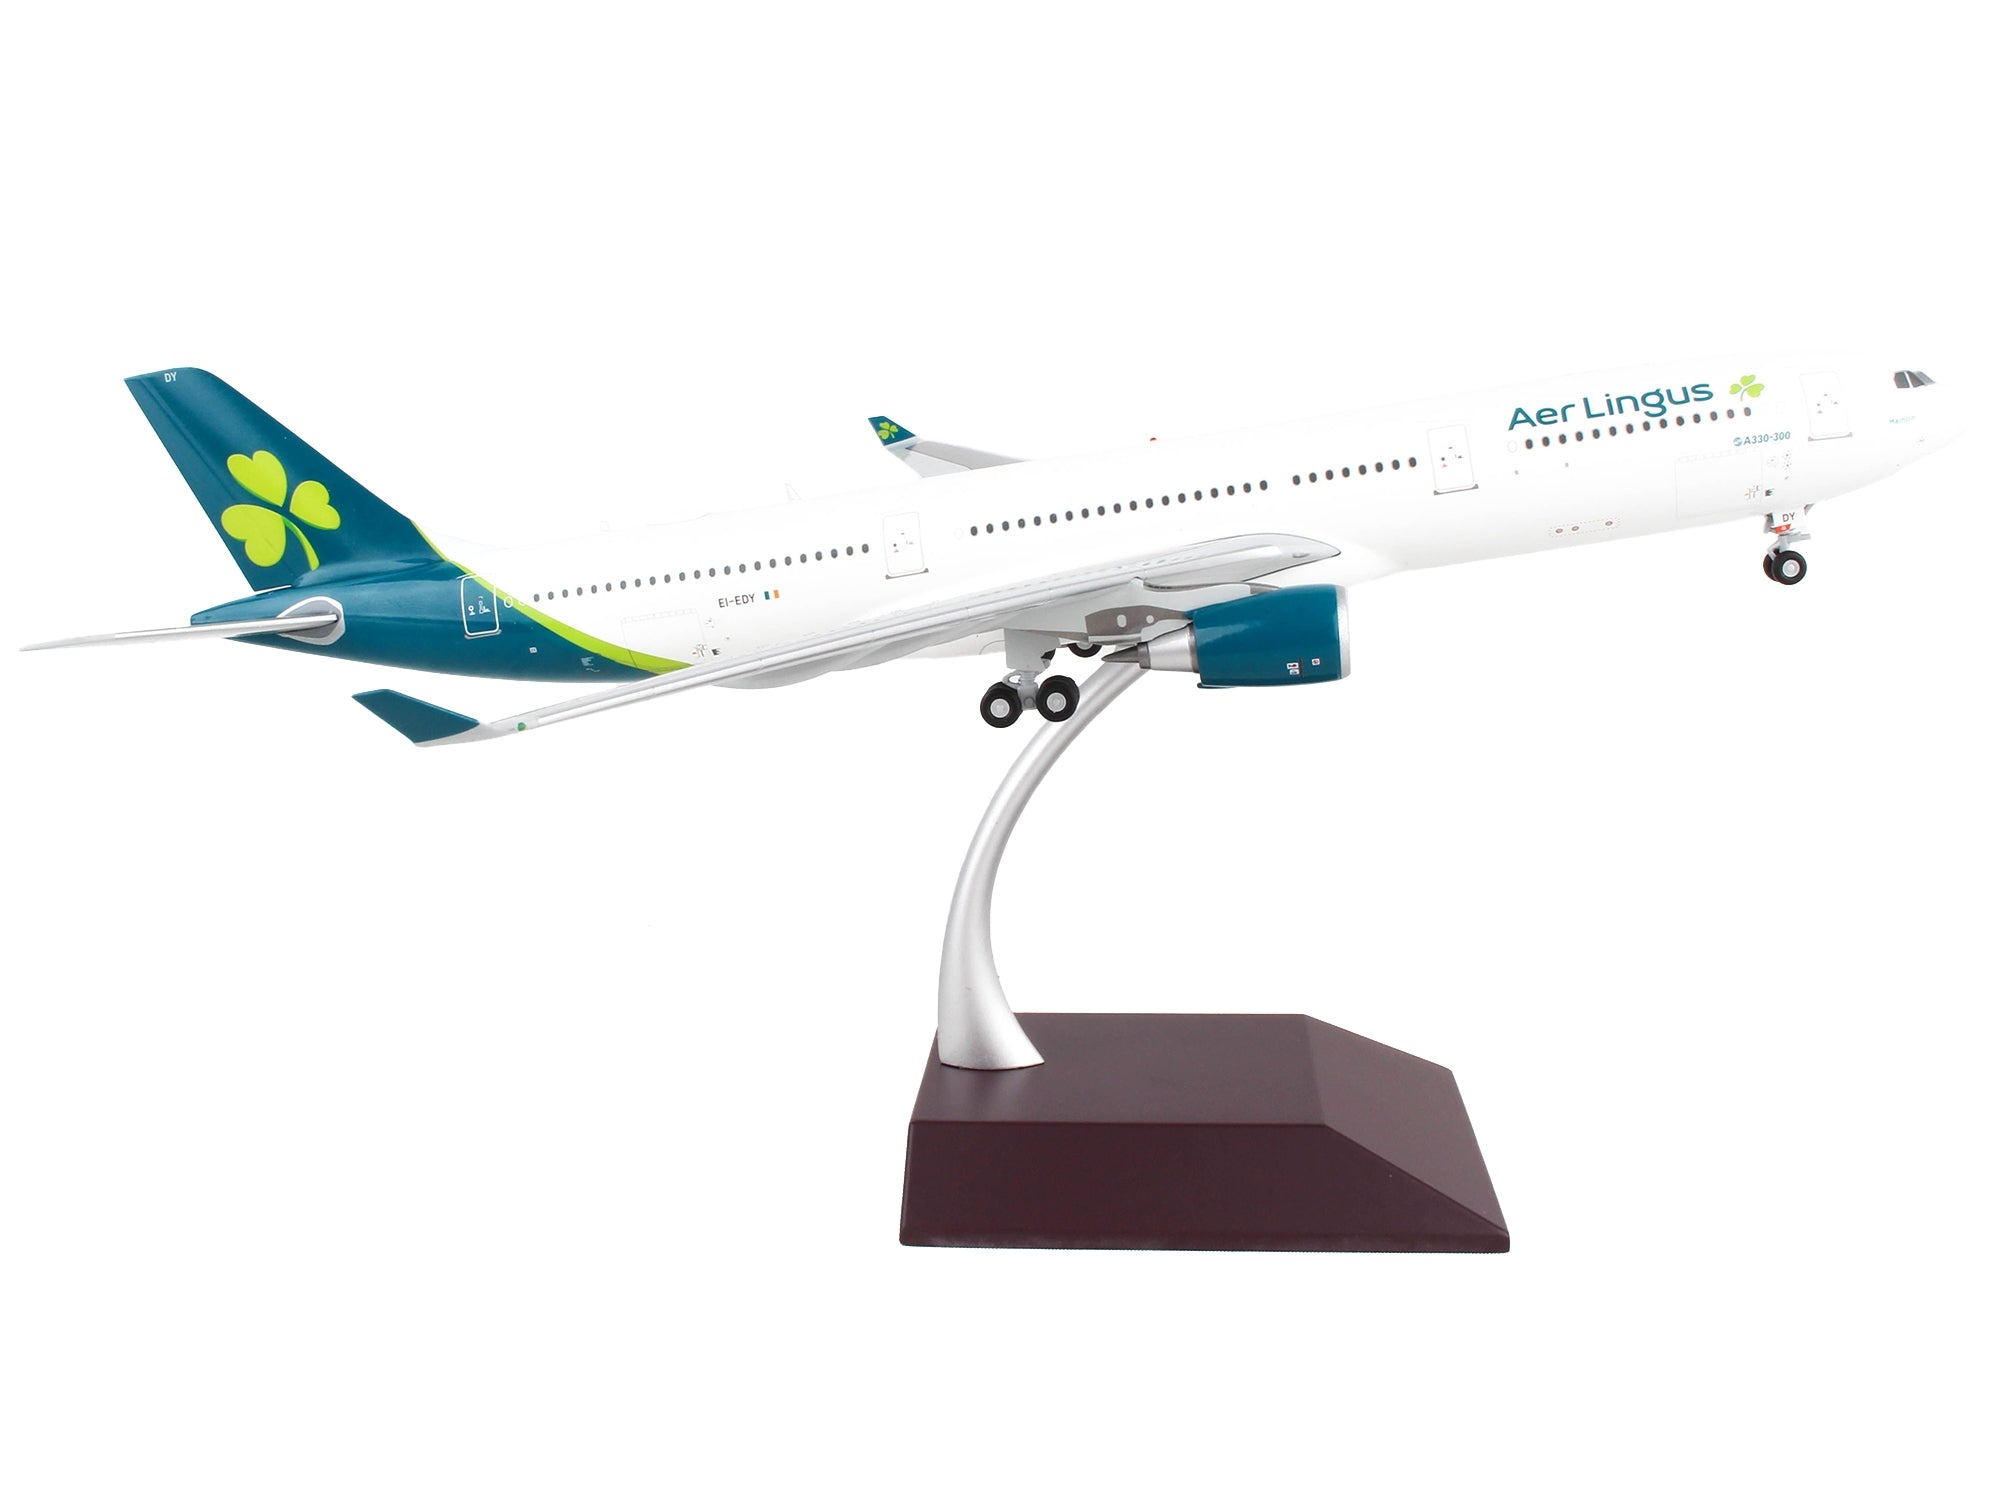 Airbus A330-300 Commercial Aircraft "Aer Lingus" White with Teal Tail "Gemini 200" Series 1/200 Diecast Model Airplane by GeminiJets